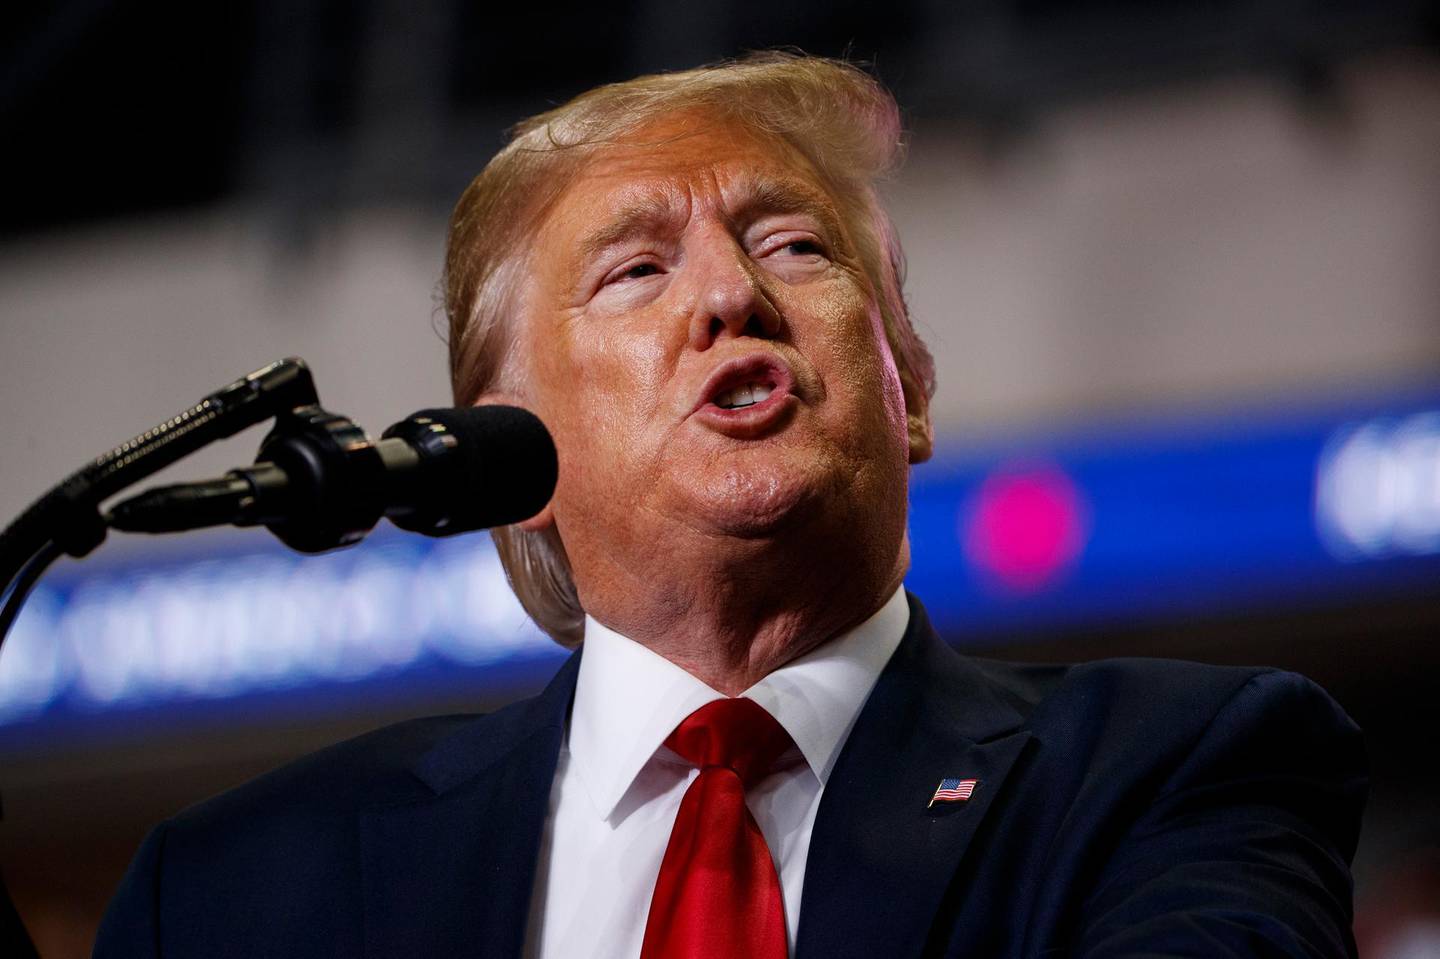 FIEL - In this Sept. 16, 2019, file photo, President Donald Trump speaks during a campaign rally at the Santa Ana Star Center in Rio Rancho, N.M. North Korea has praised President Trump for saying Washington may pursue an unspecified â€œnew methodâ€ in nuclear negotiations with Pyongyang. (AP Photo/Evan Vucci, File)